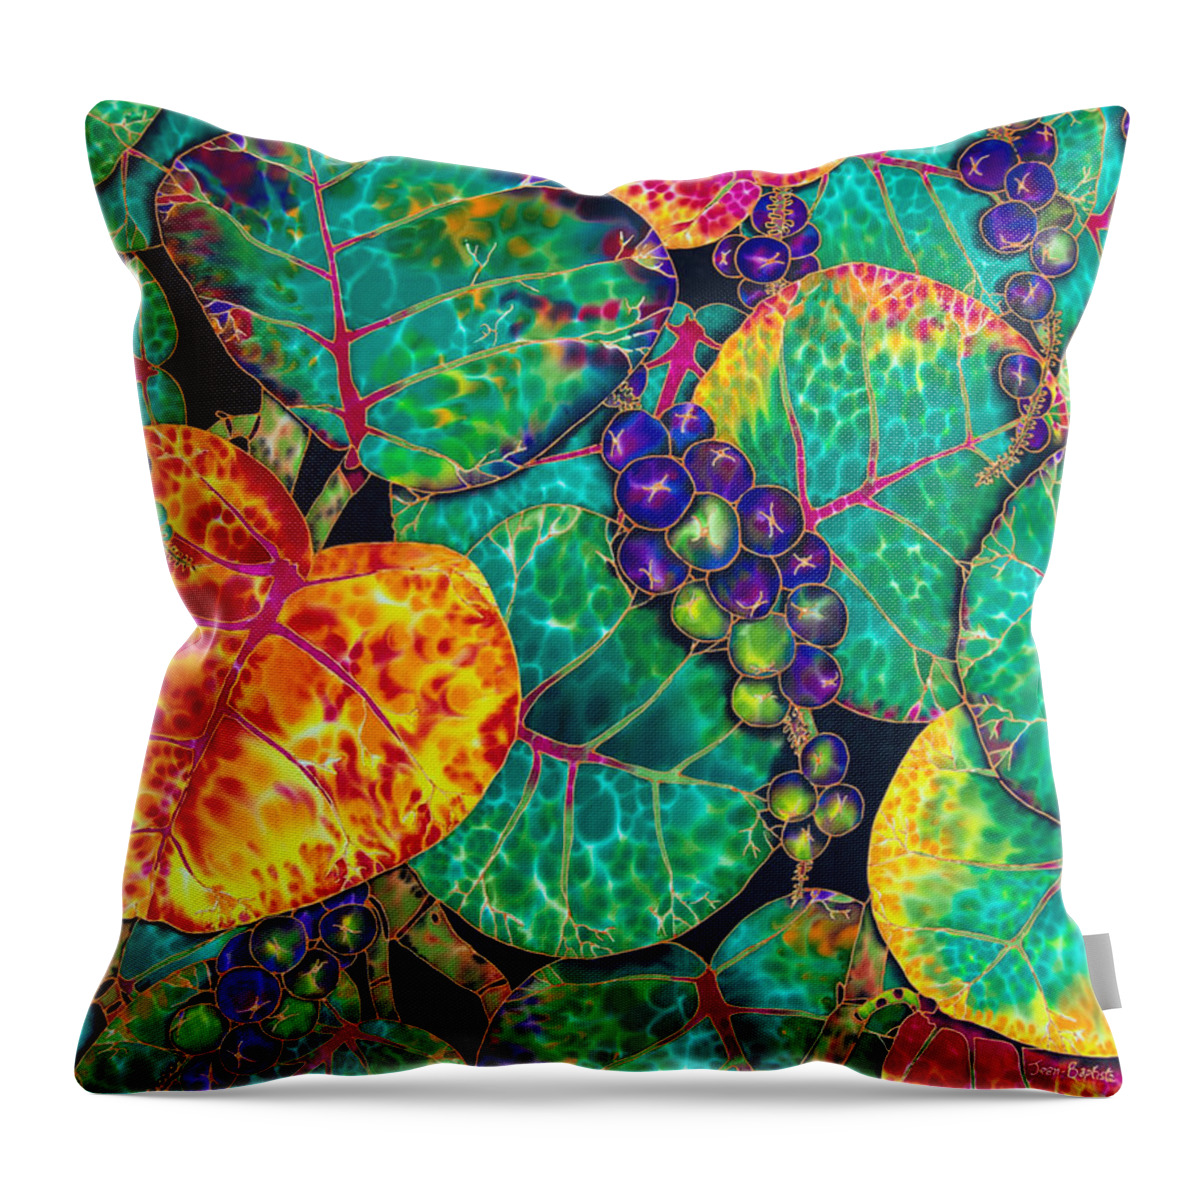 Jean-baptiste Design Throw Pillow featuring the painting Sea Grapes by Daniel Jean-Baptiste